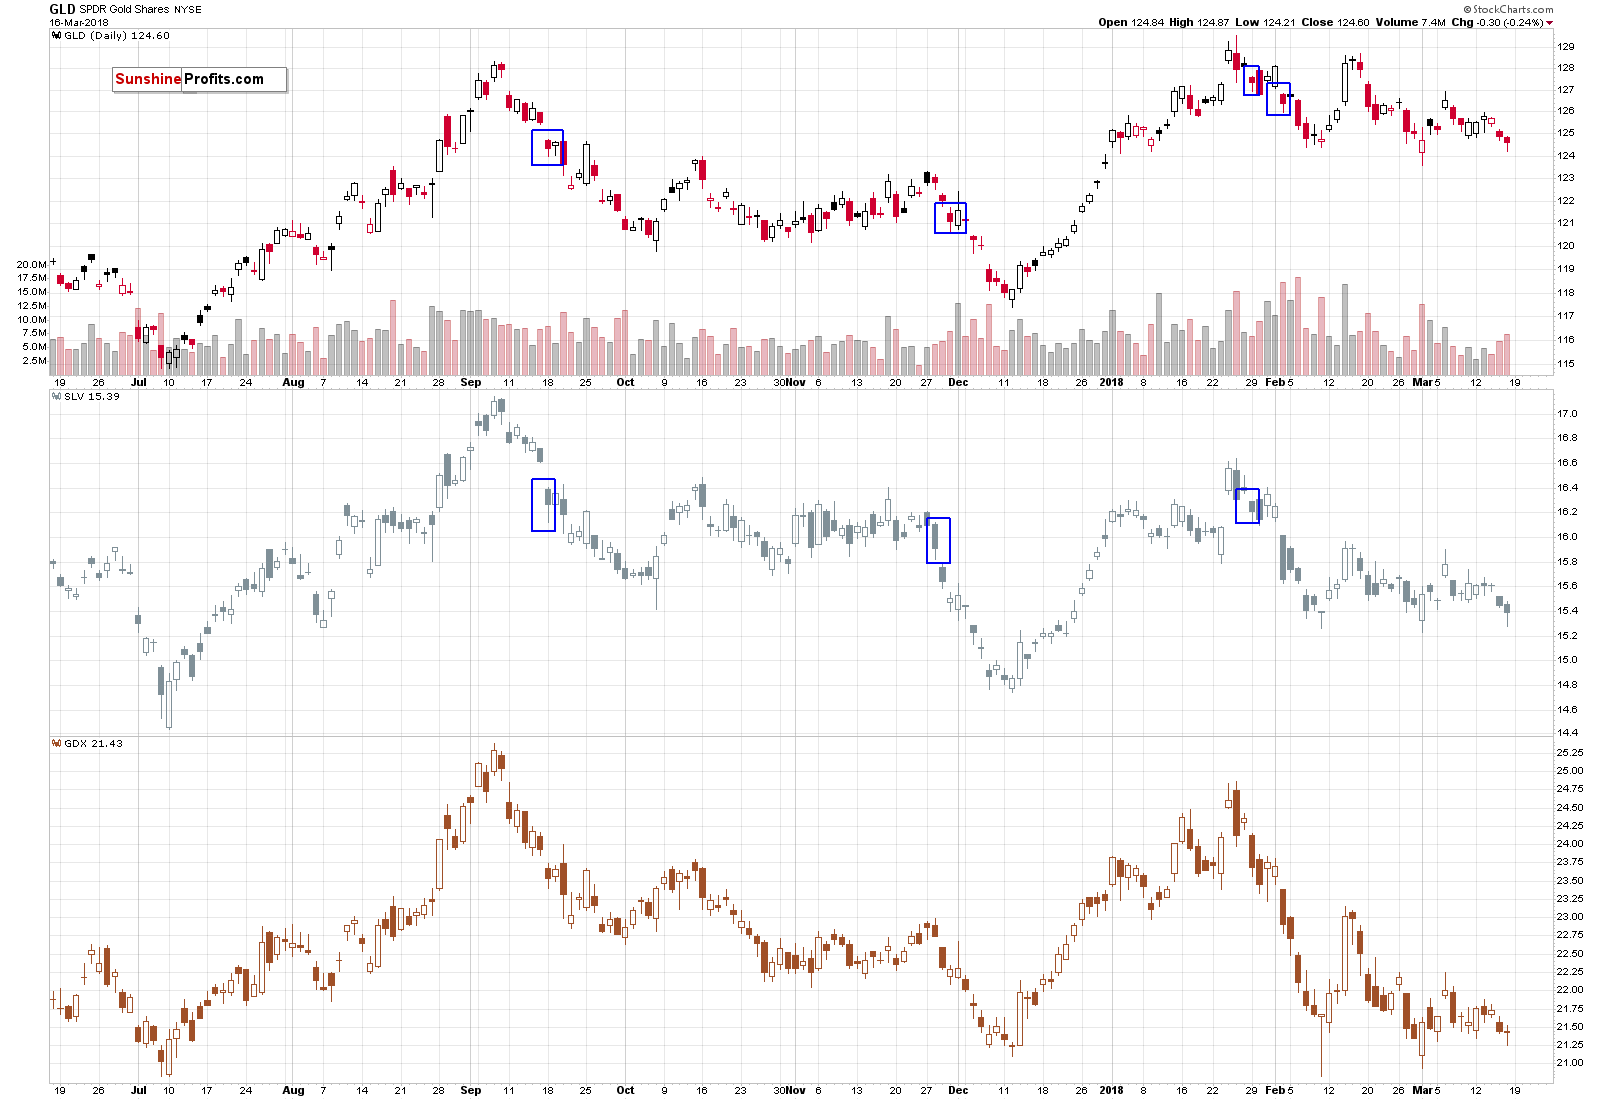 GLD, SLV, GDX - Gold, Silver and miners